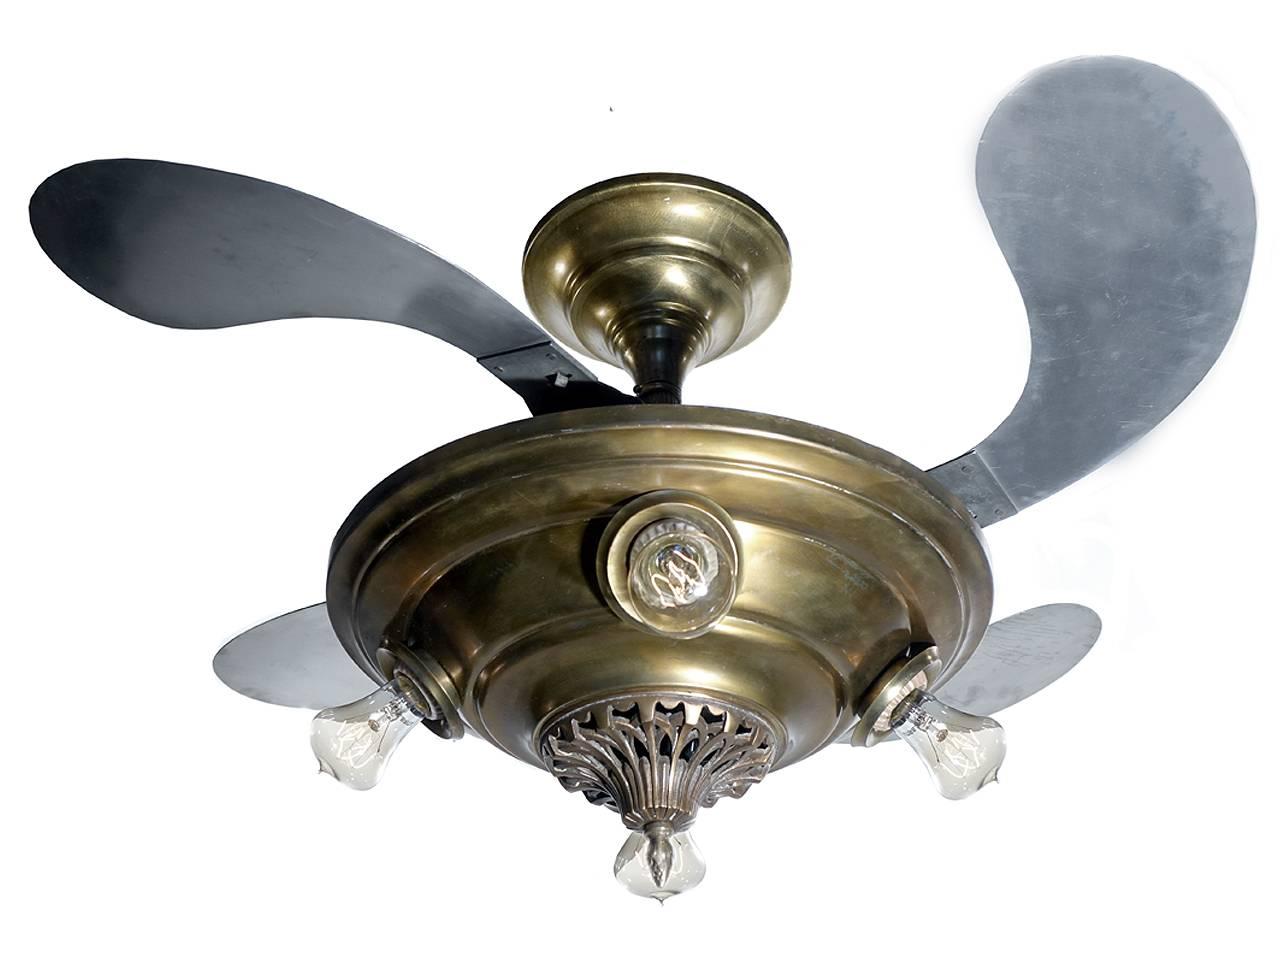 This was the first ever retractable blade ceiling fan to exist in history and an amazing example of Industrial ingenuity. Made from the 1920s-1930s. When the fan turns on, the centrifugal force causes the blades to extend outwards until fully